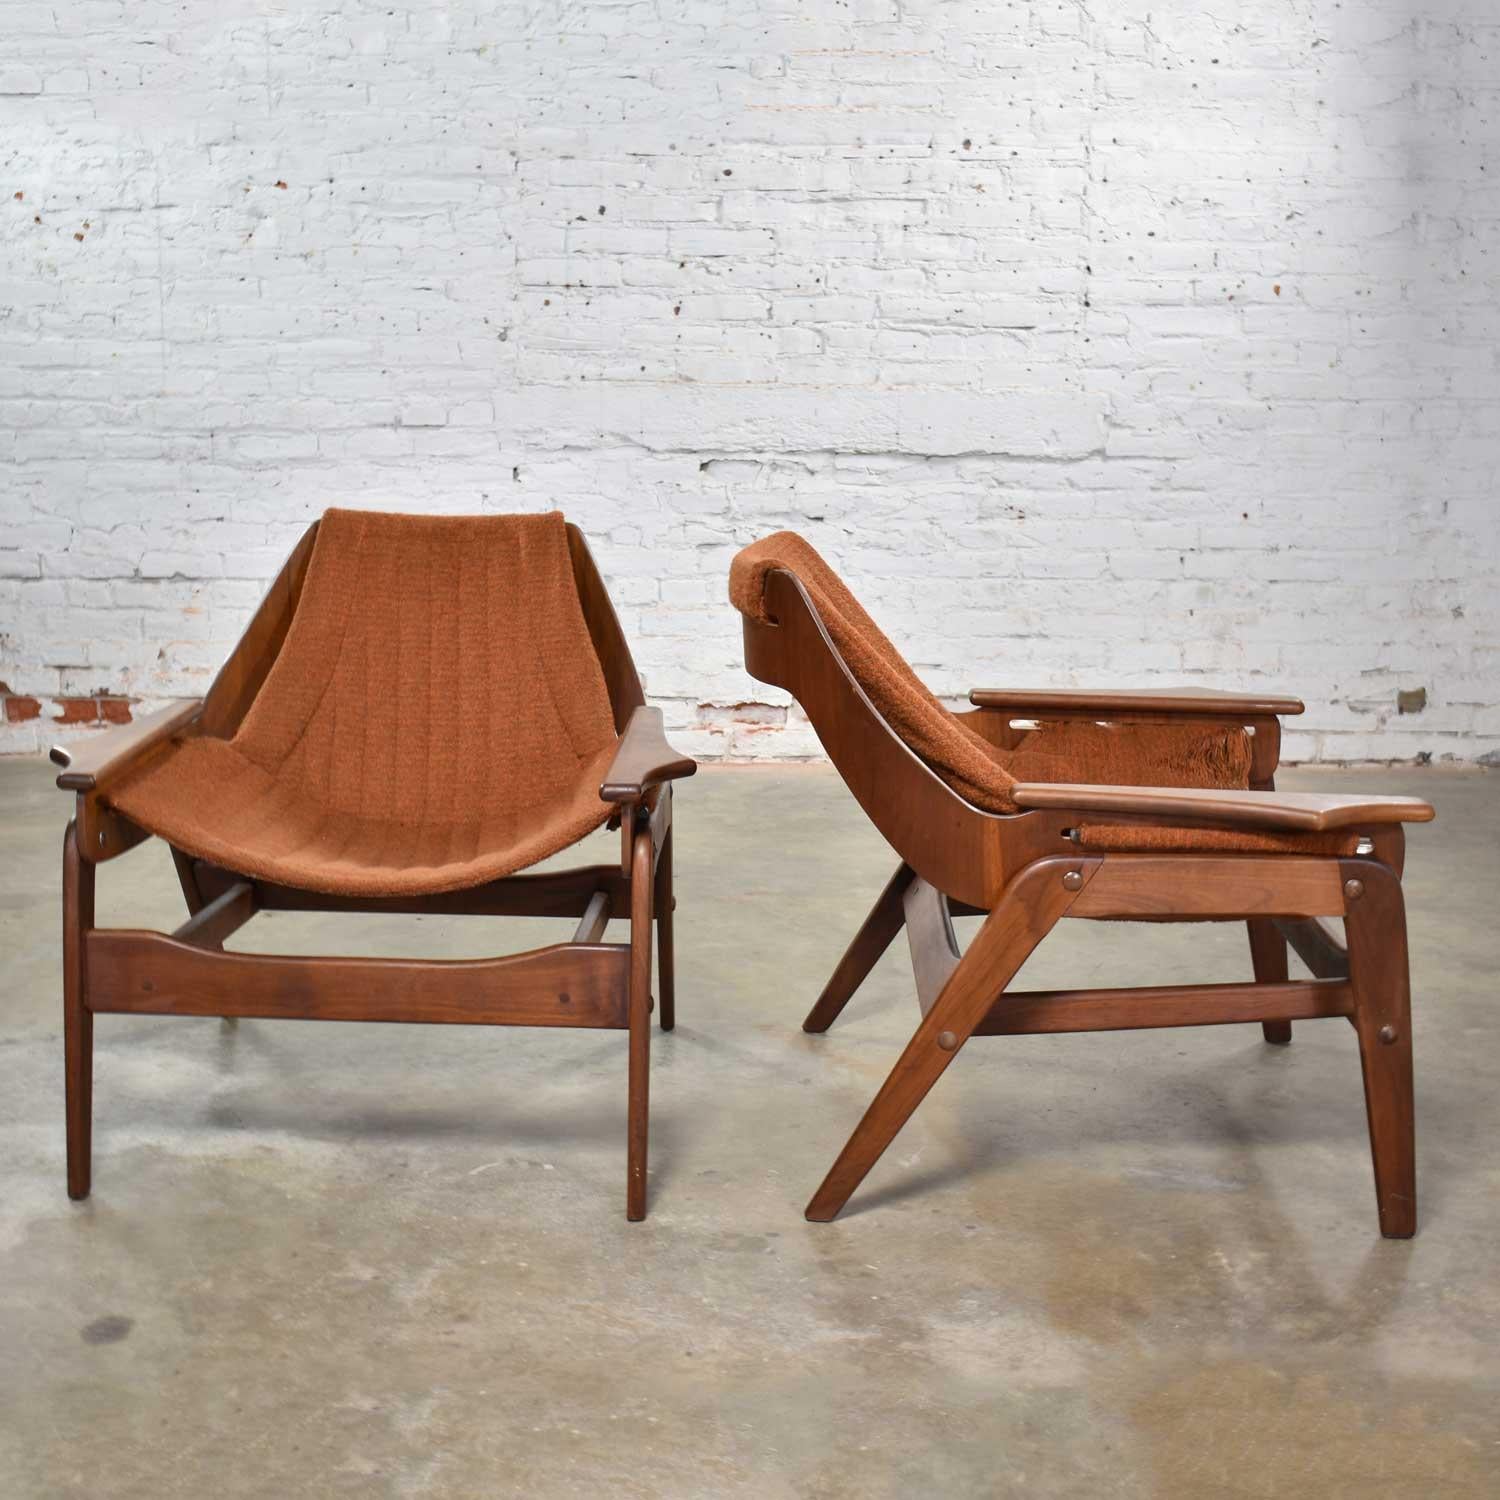 20th Century Mid-Century Modern Triumph I Sling Chairs by Jerry Johnson for Charlton a Pair